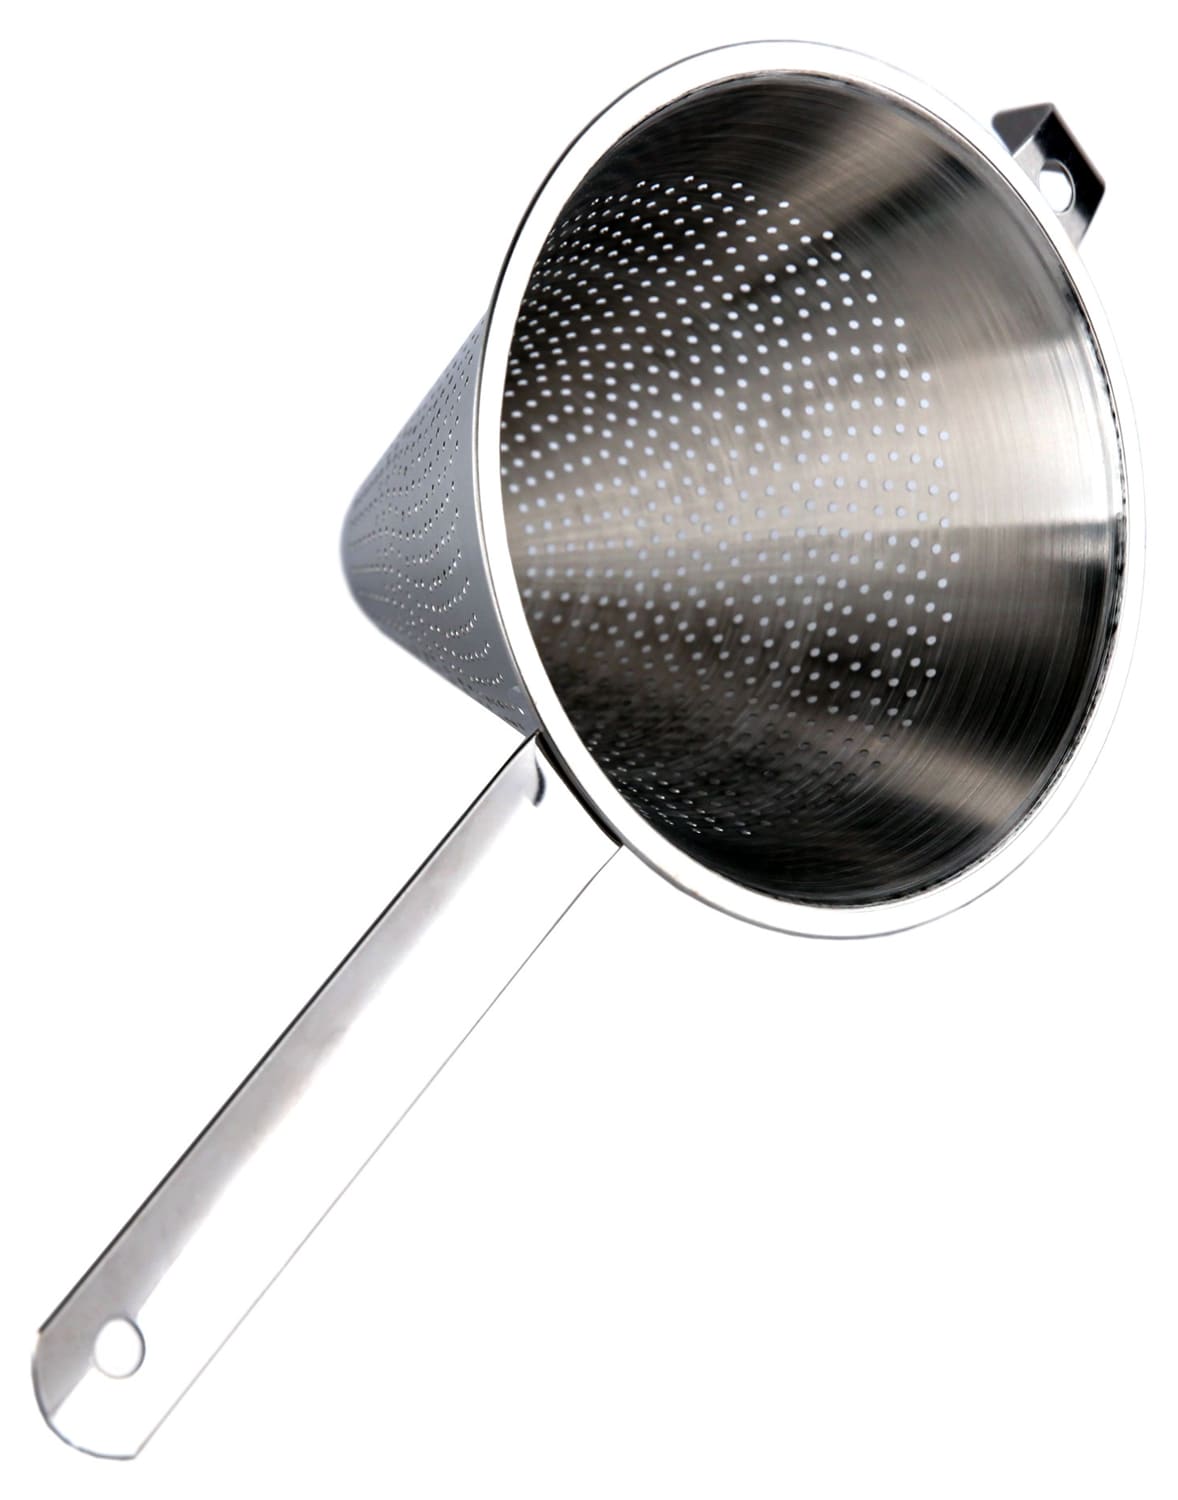 https://files.meilleurduchef.com/mdc/photo/product/mfr/chinois-conical-strainer-10/chinois-conical-strainer-10-2-zoom.jpg